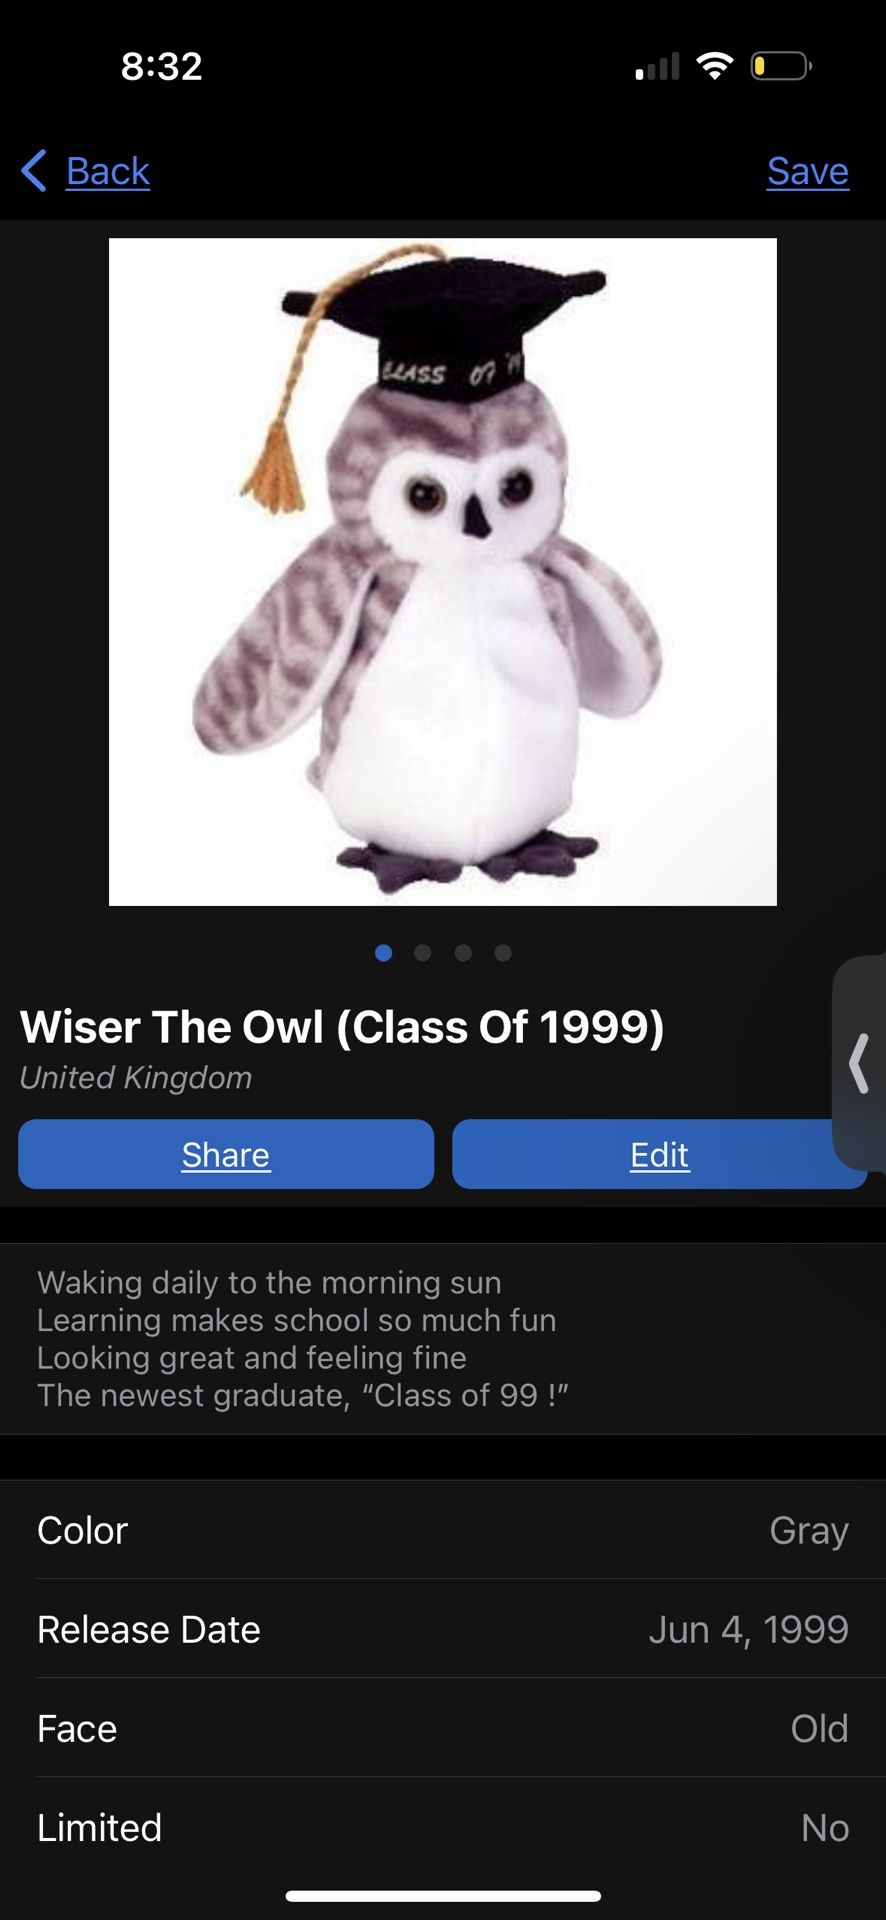 Wiser The Owl (Class Of 1999)